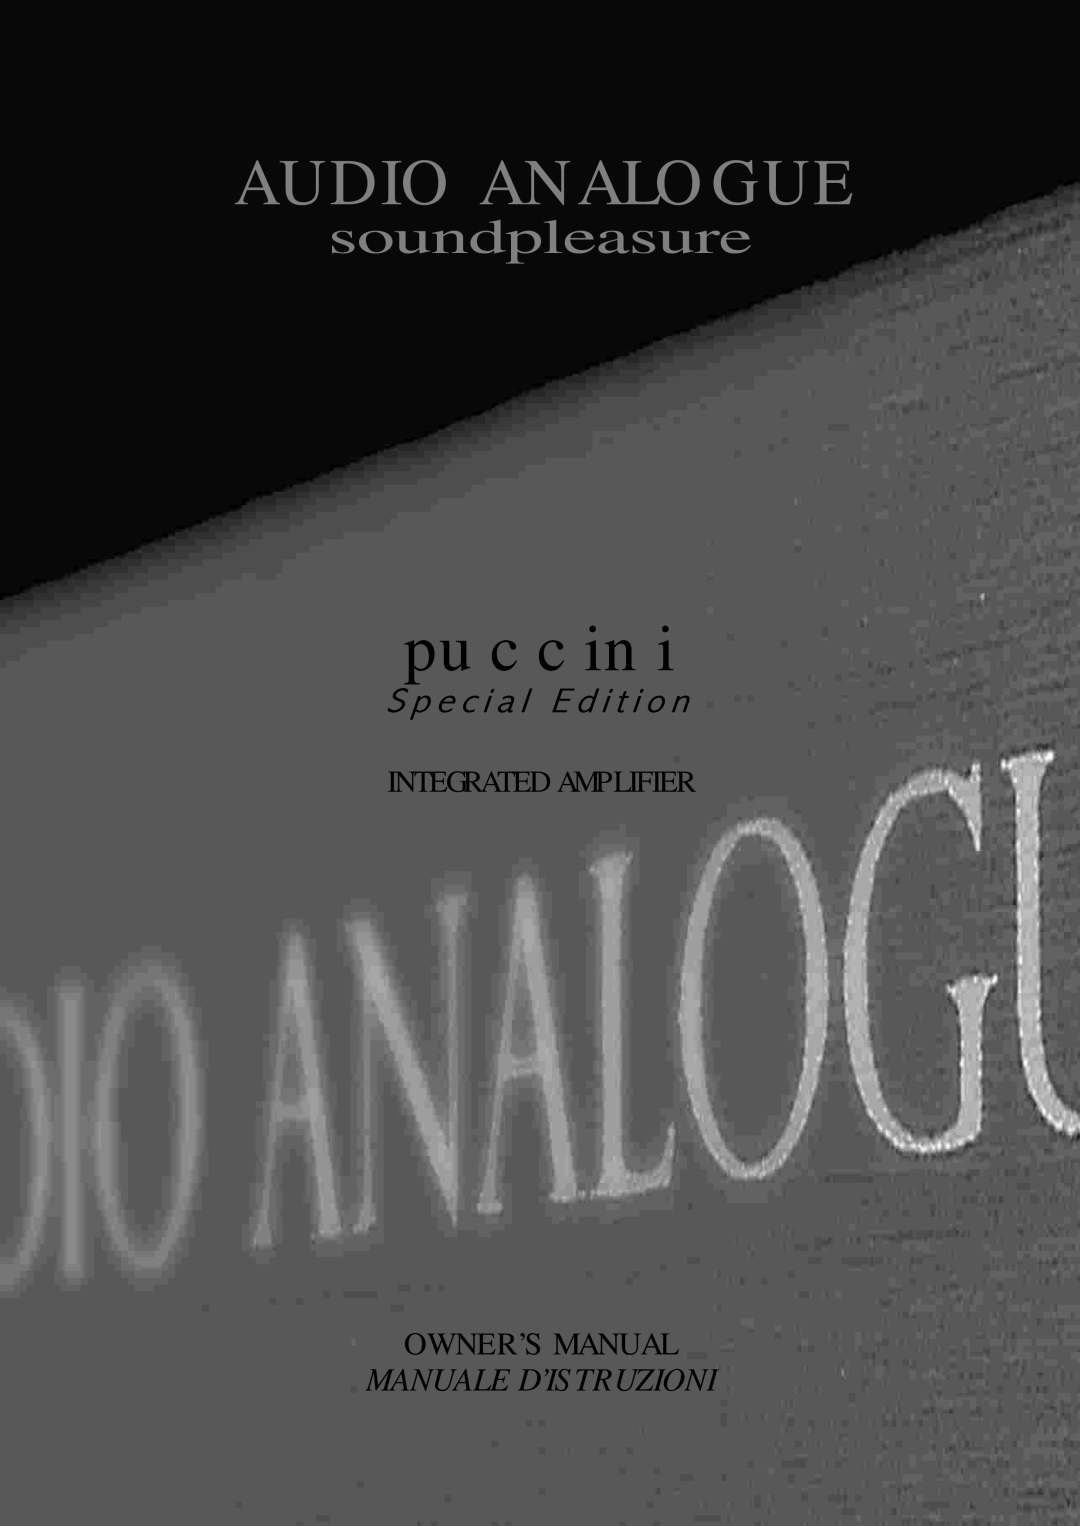 Audio Analogue SRL Audio Analogue SRL owner manual puccini, soundpleasure, Integrated Amplifier, Owner’S Manual 